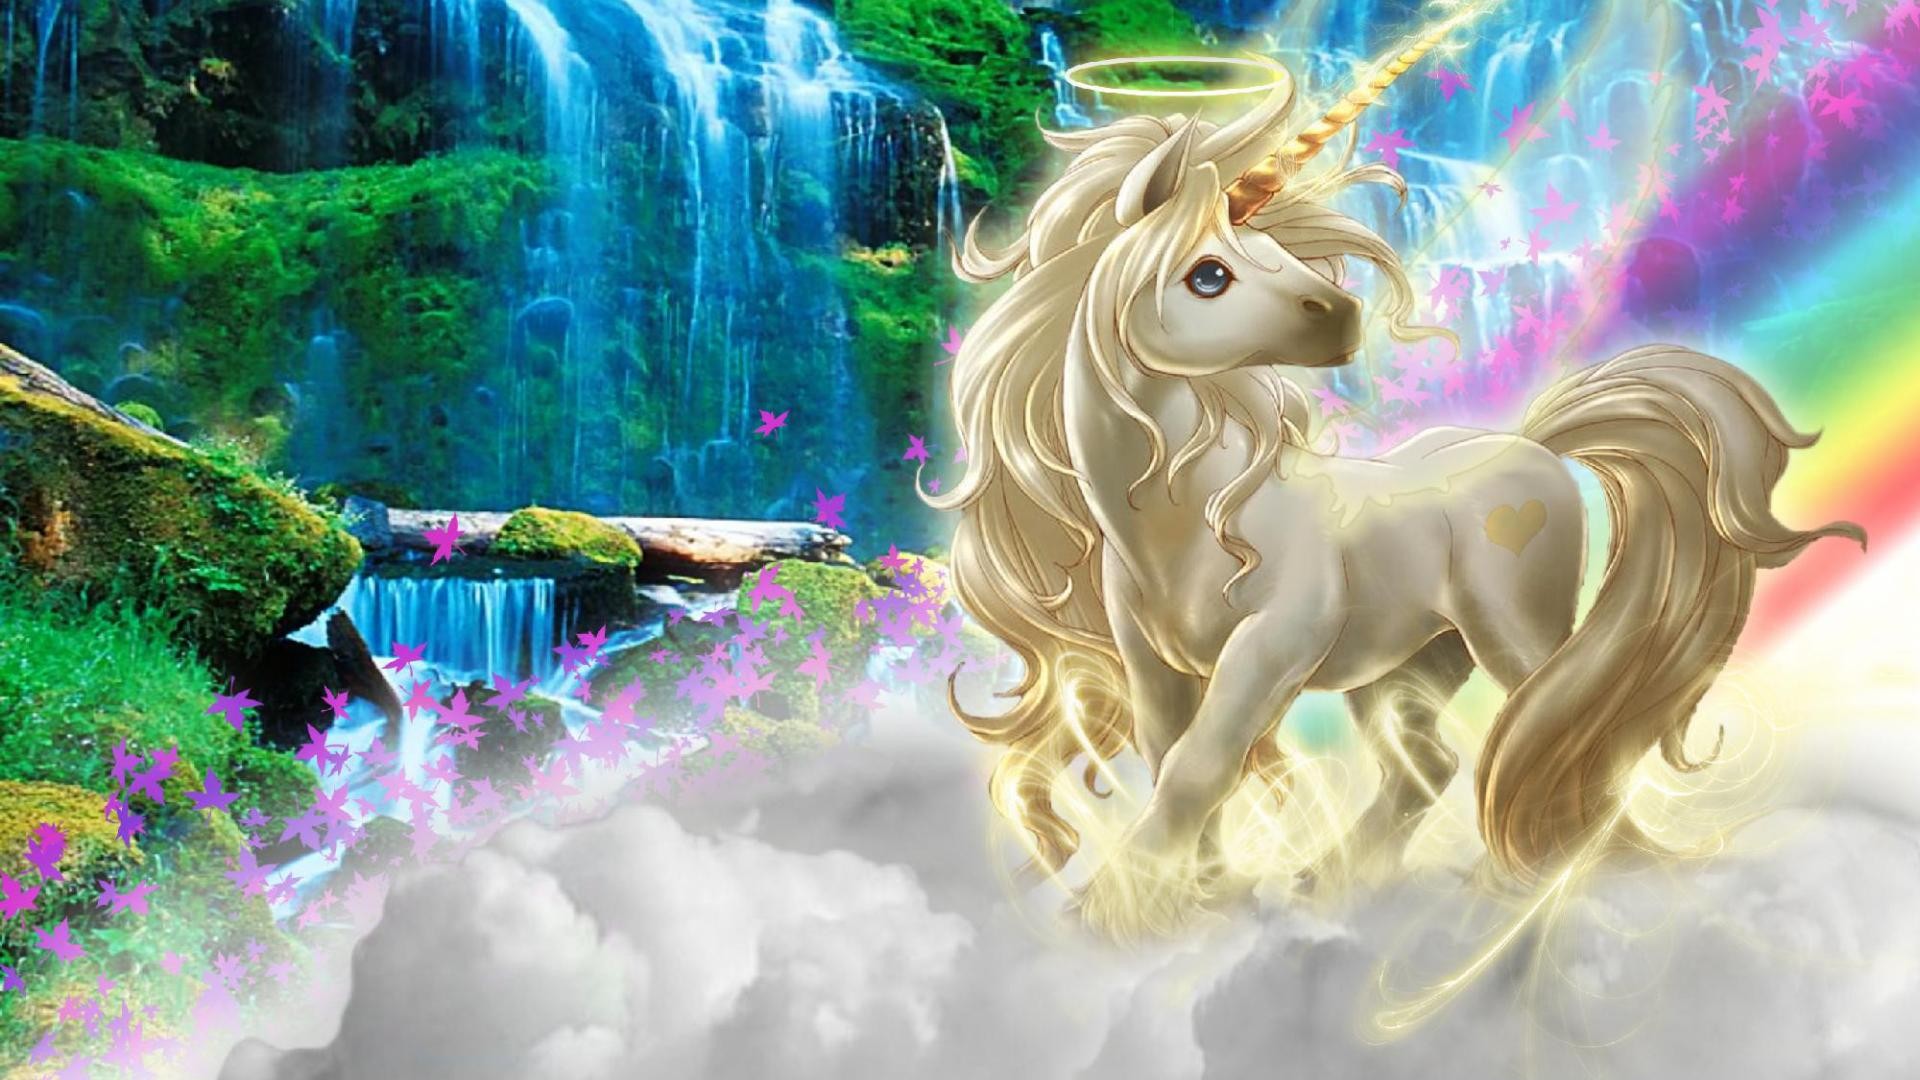 Cute Girly Unicorn Desktop Backgrounds HD with high-resolution 1920x1080 pixel. You can use this wallpaper for your Windows and Mac OS computers as well as your Android and iPhone smartphones